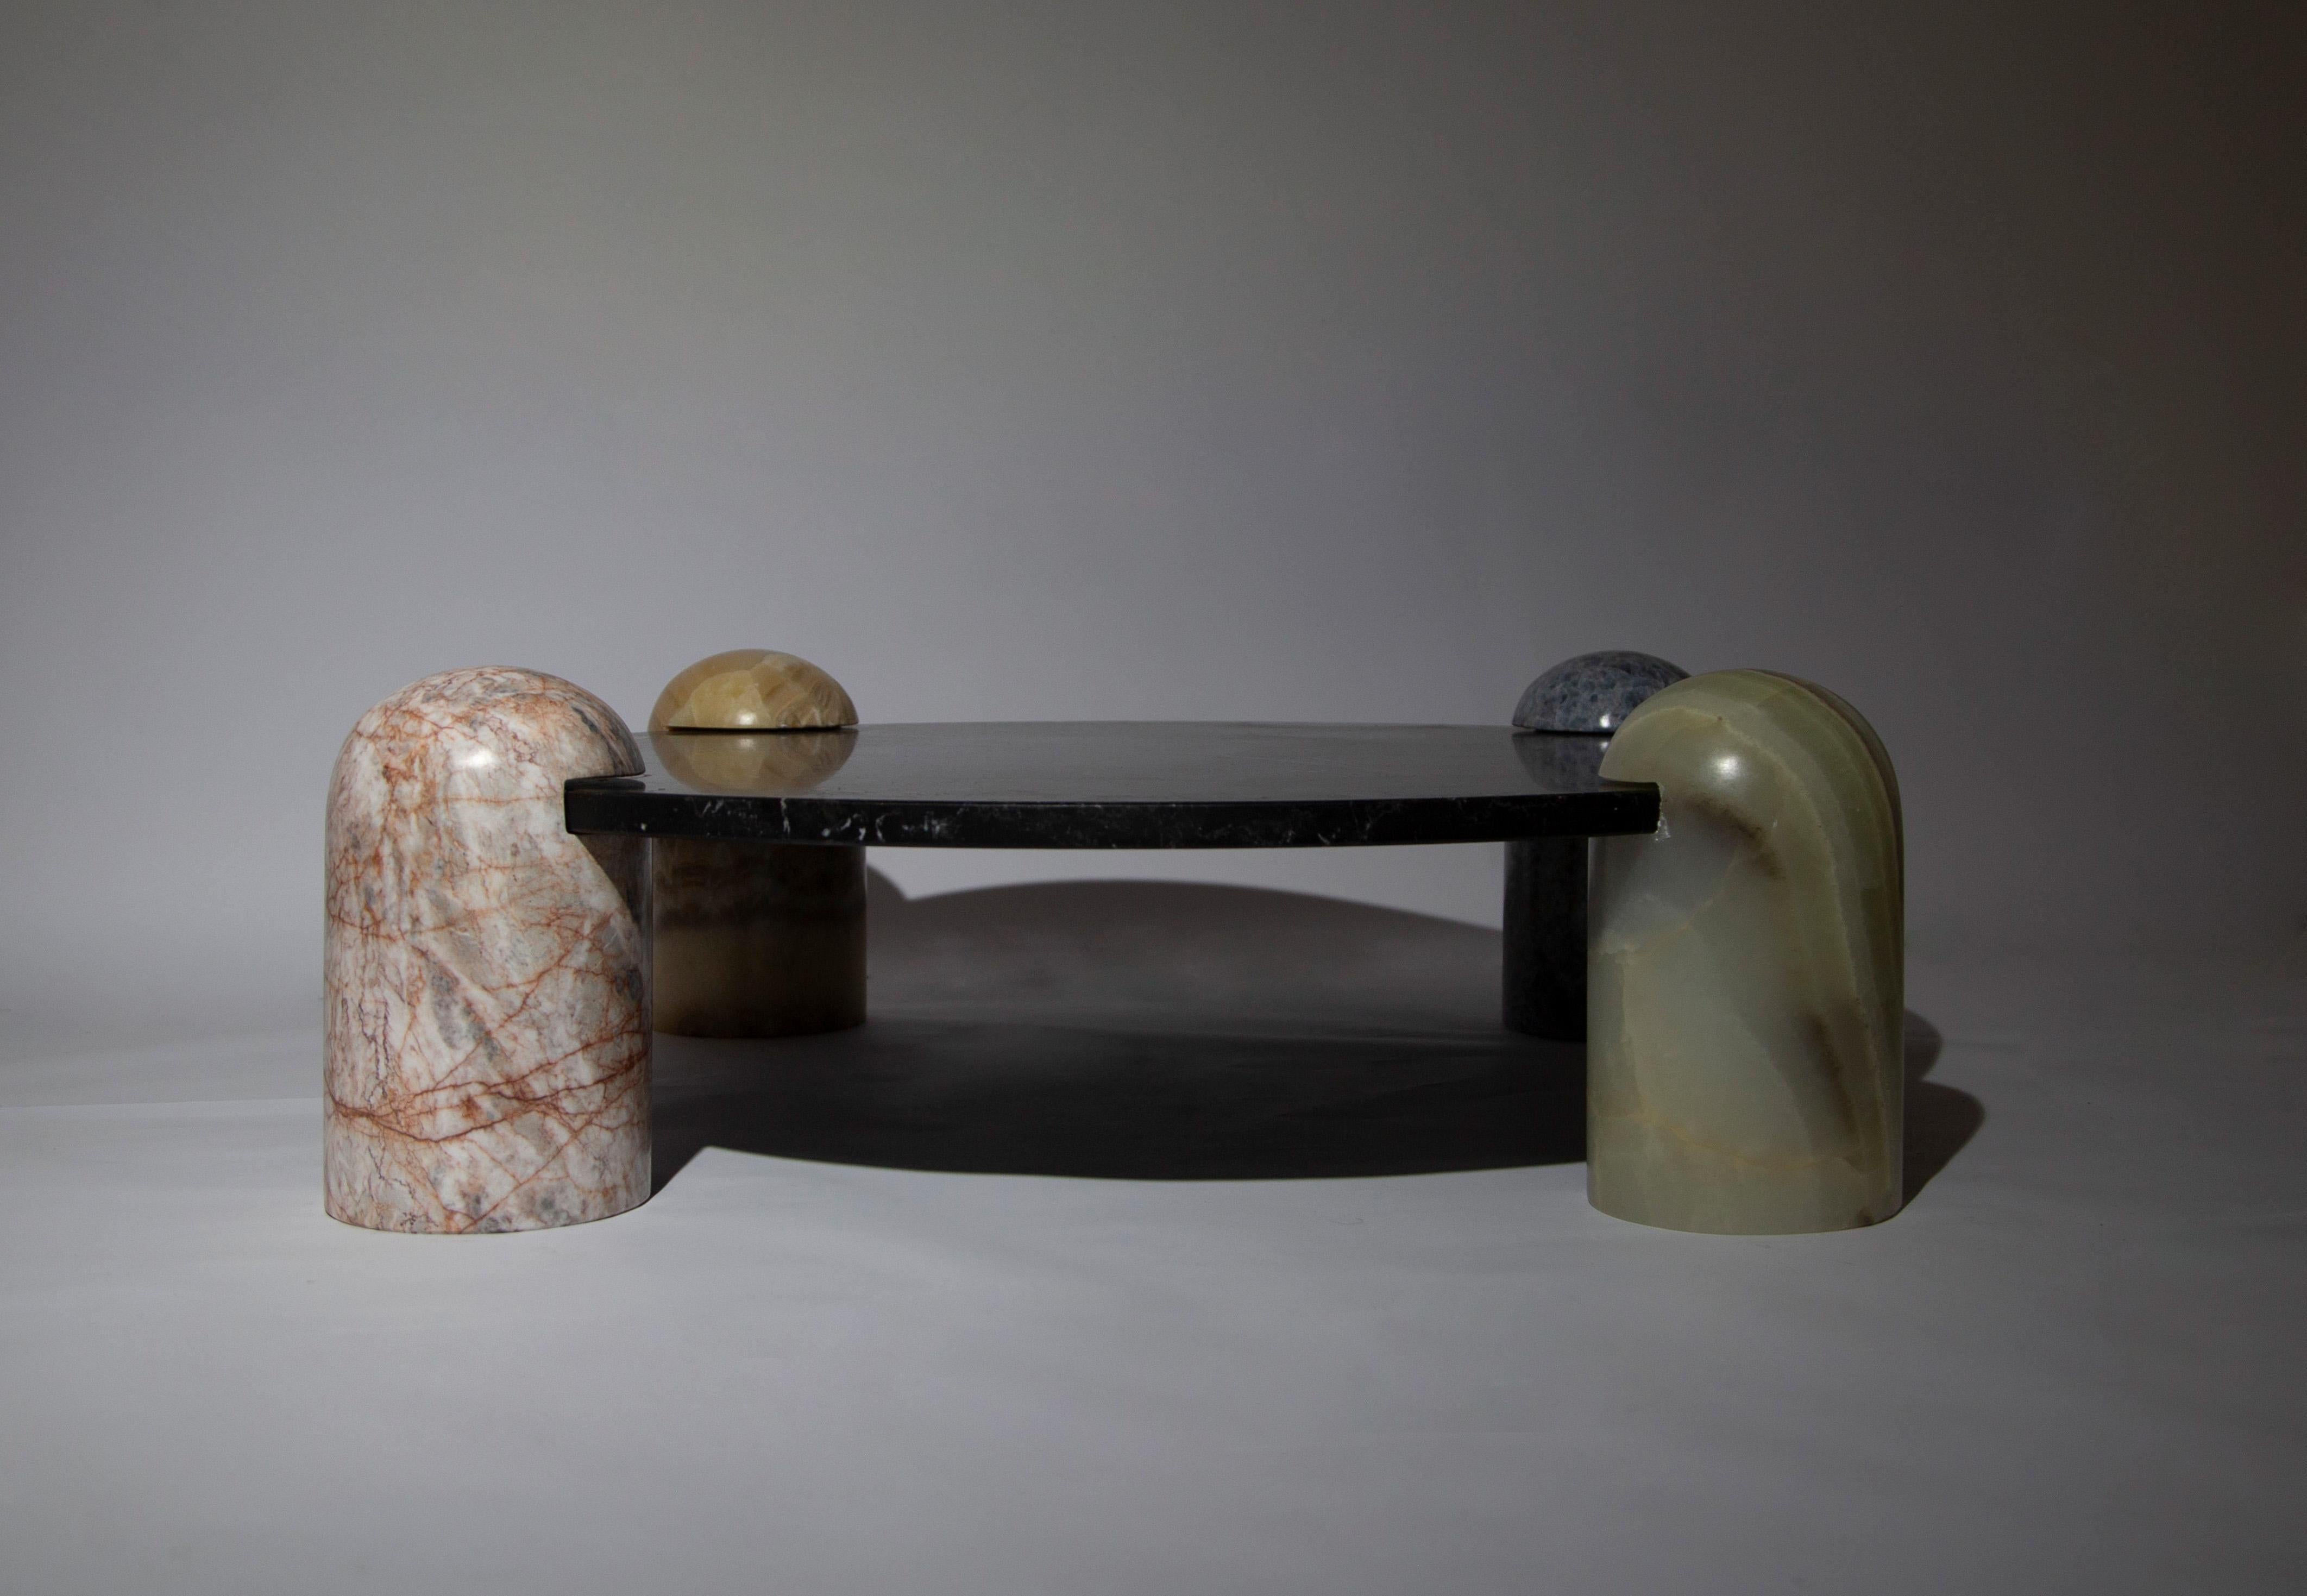 Rounded pillars of blue calcite, pink marble, caramel onyx and green onyx carry a black marble top to create  Play-time Table; An elegant rendition of children’s furniture. A piece meticulously hand-sculpted from stones endemic to Mexico. The